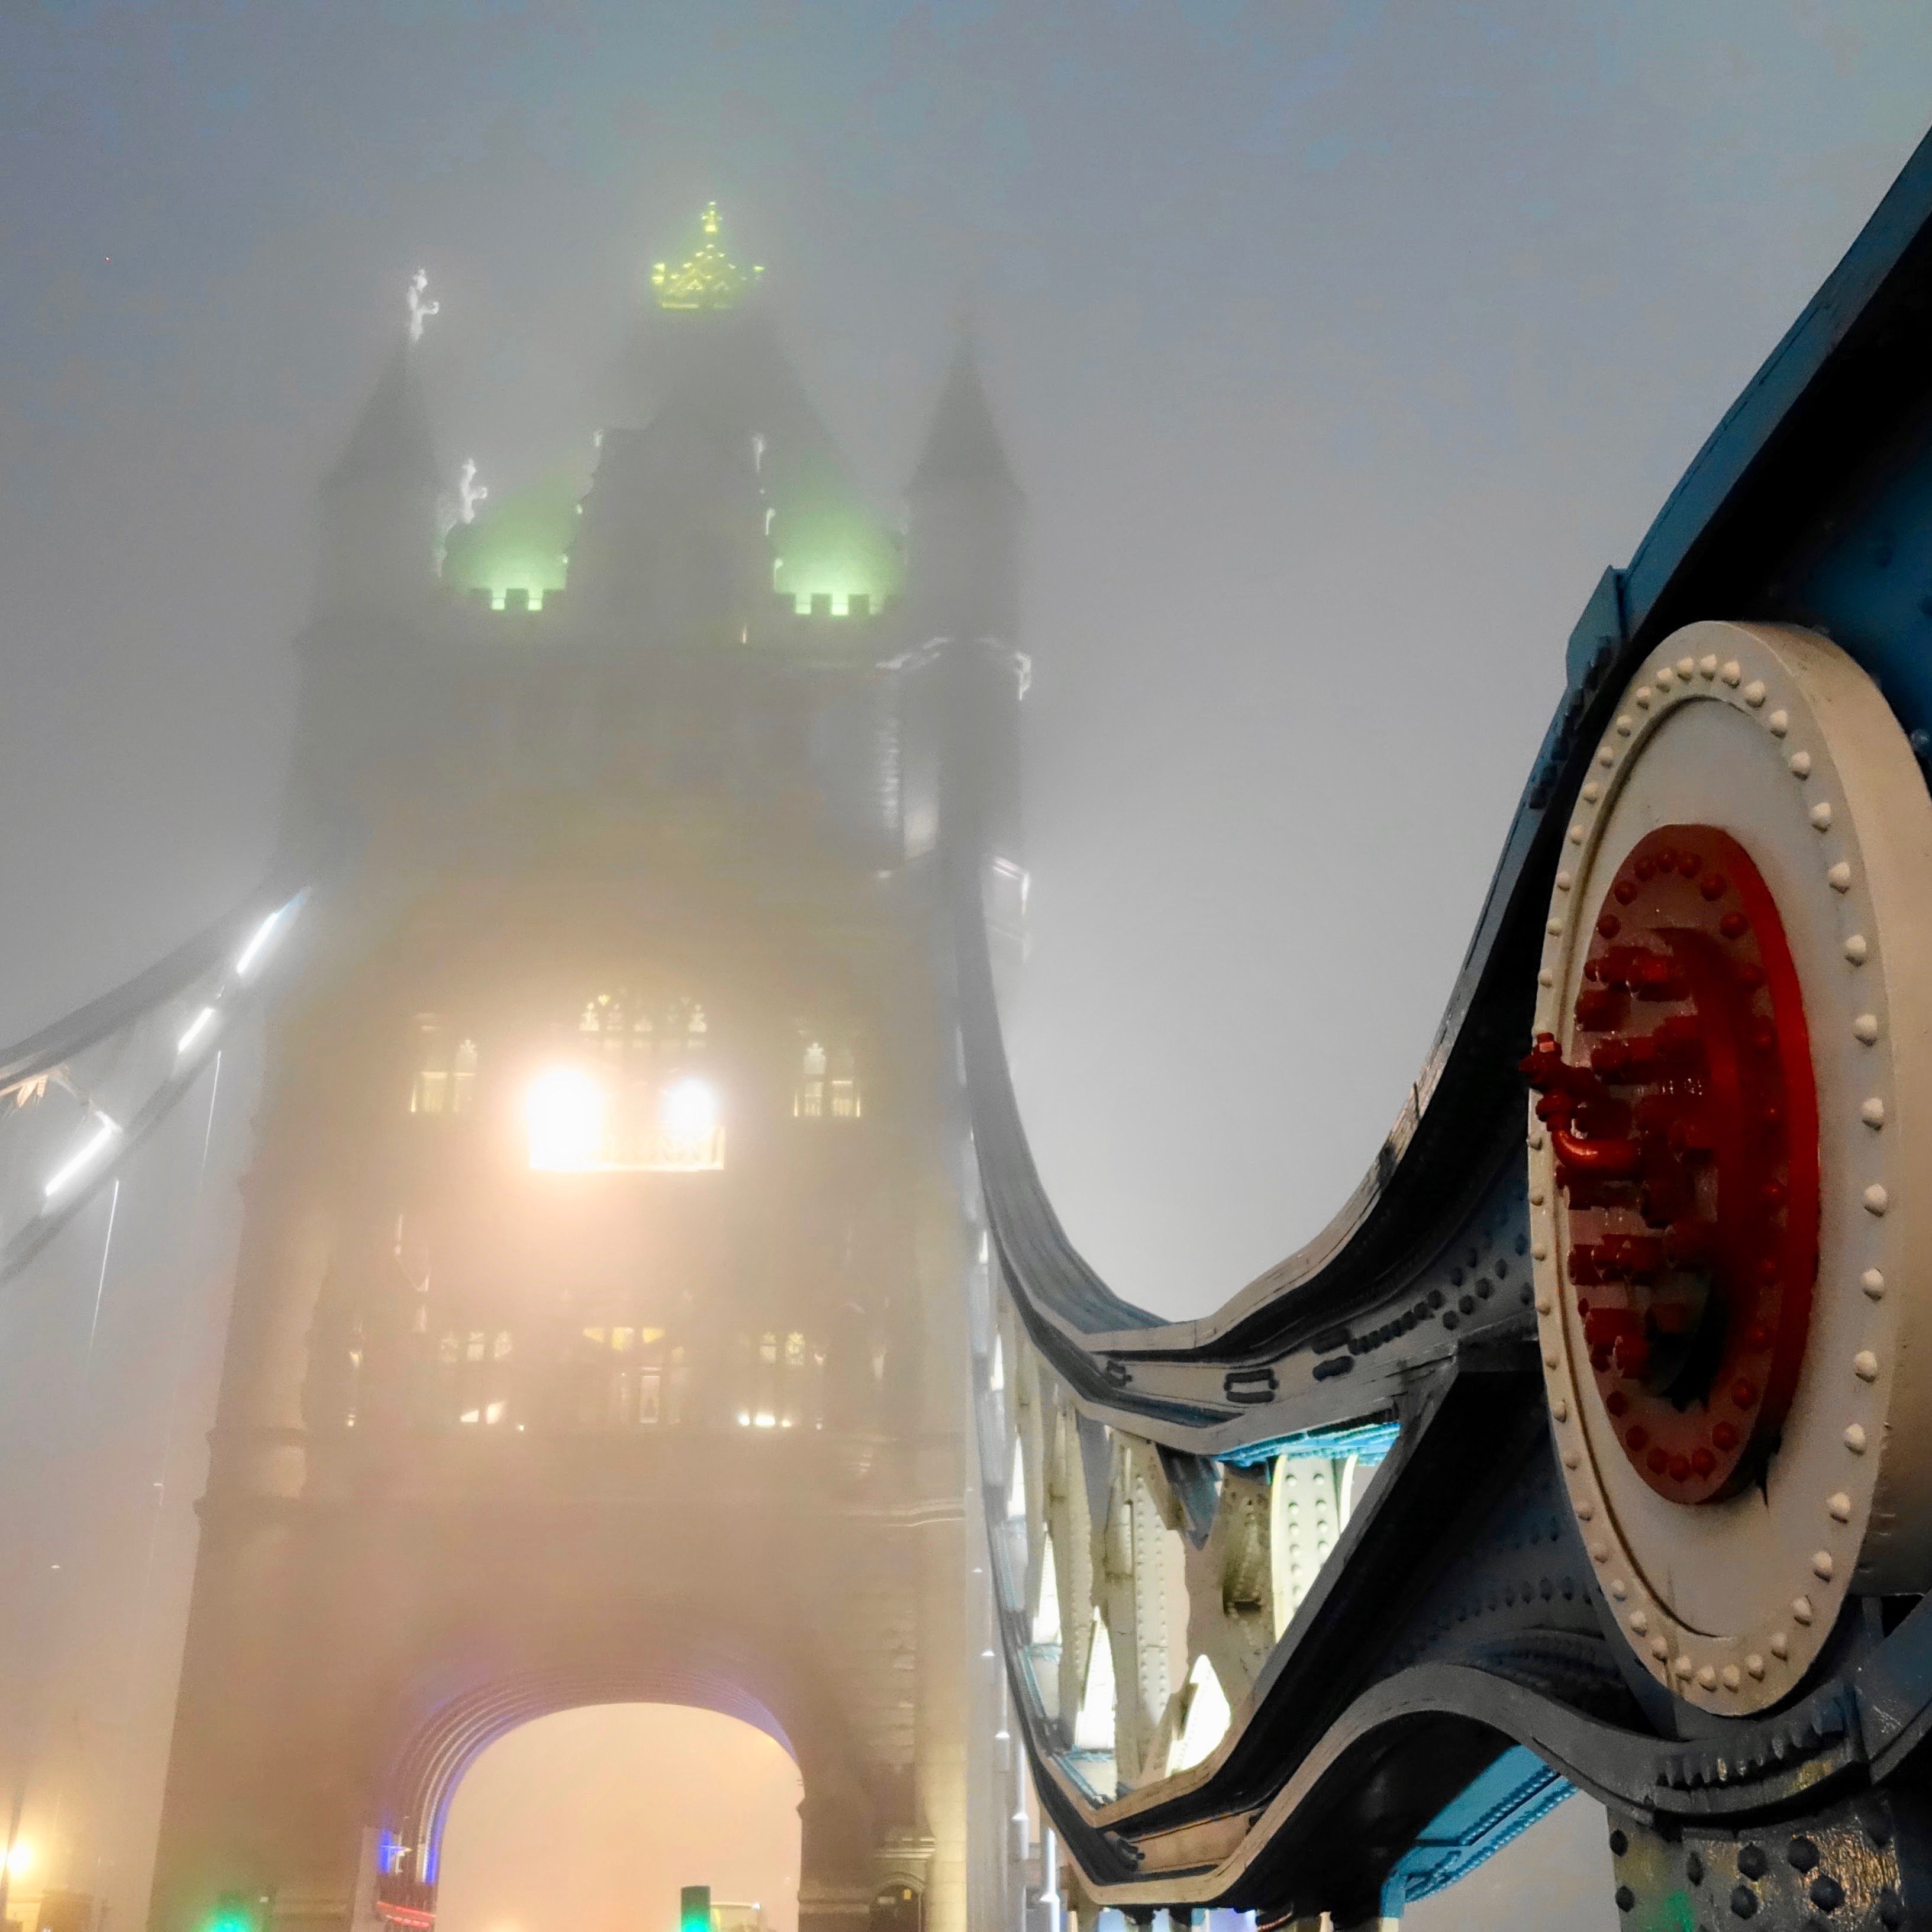 The Tower Bridge in London on a mystic quintessential foggy evening.  The green turrets at the top of the bridge can barely be seen through the fog with a brightly painted red metal structure in the foreground. 